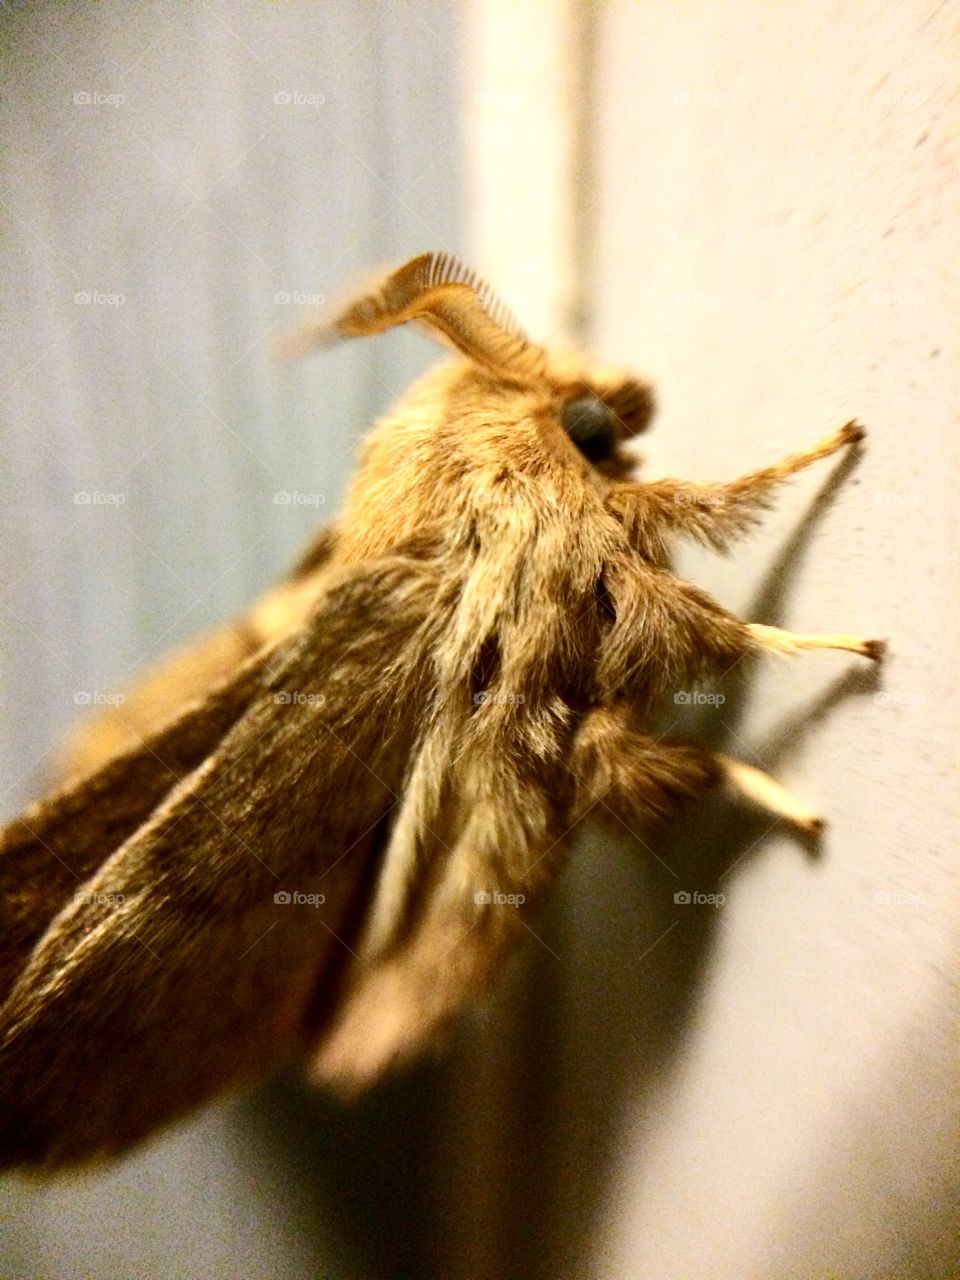 Summer Fairy. A visitor came to my door tonight to say hello!